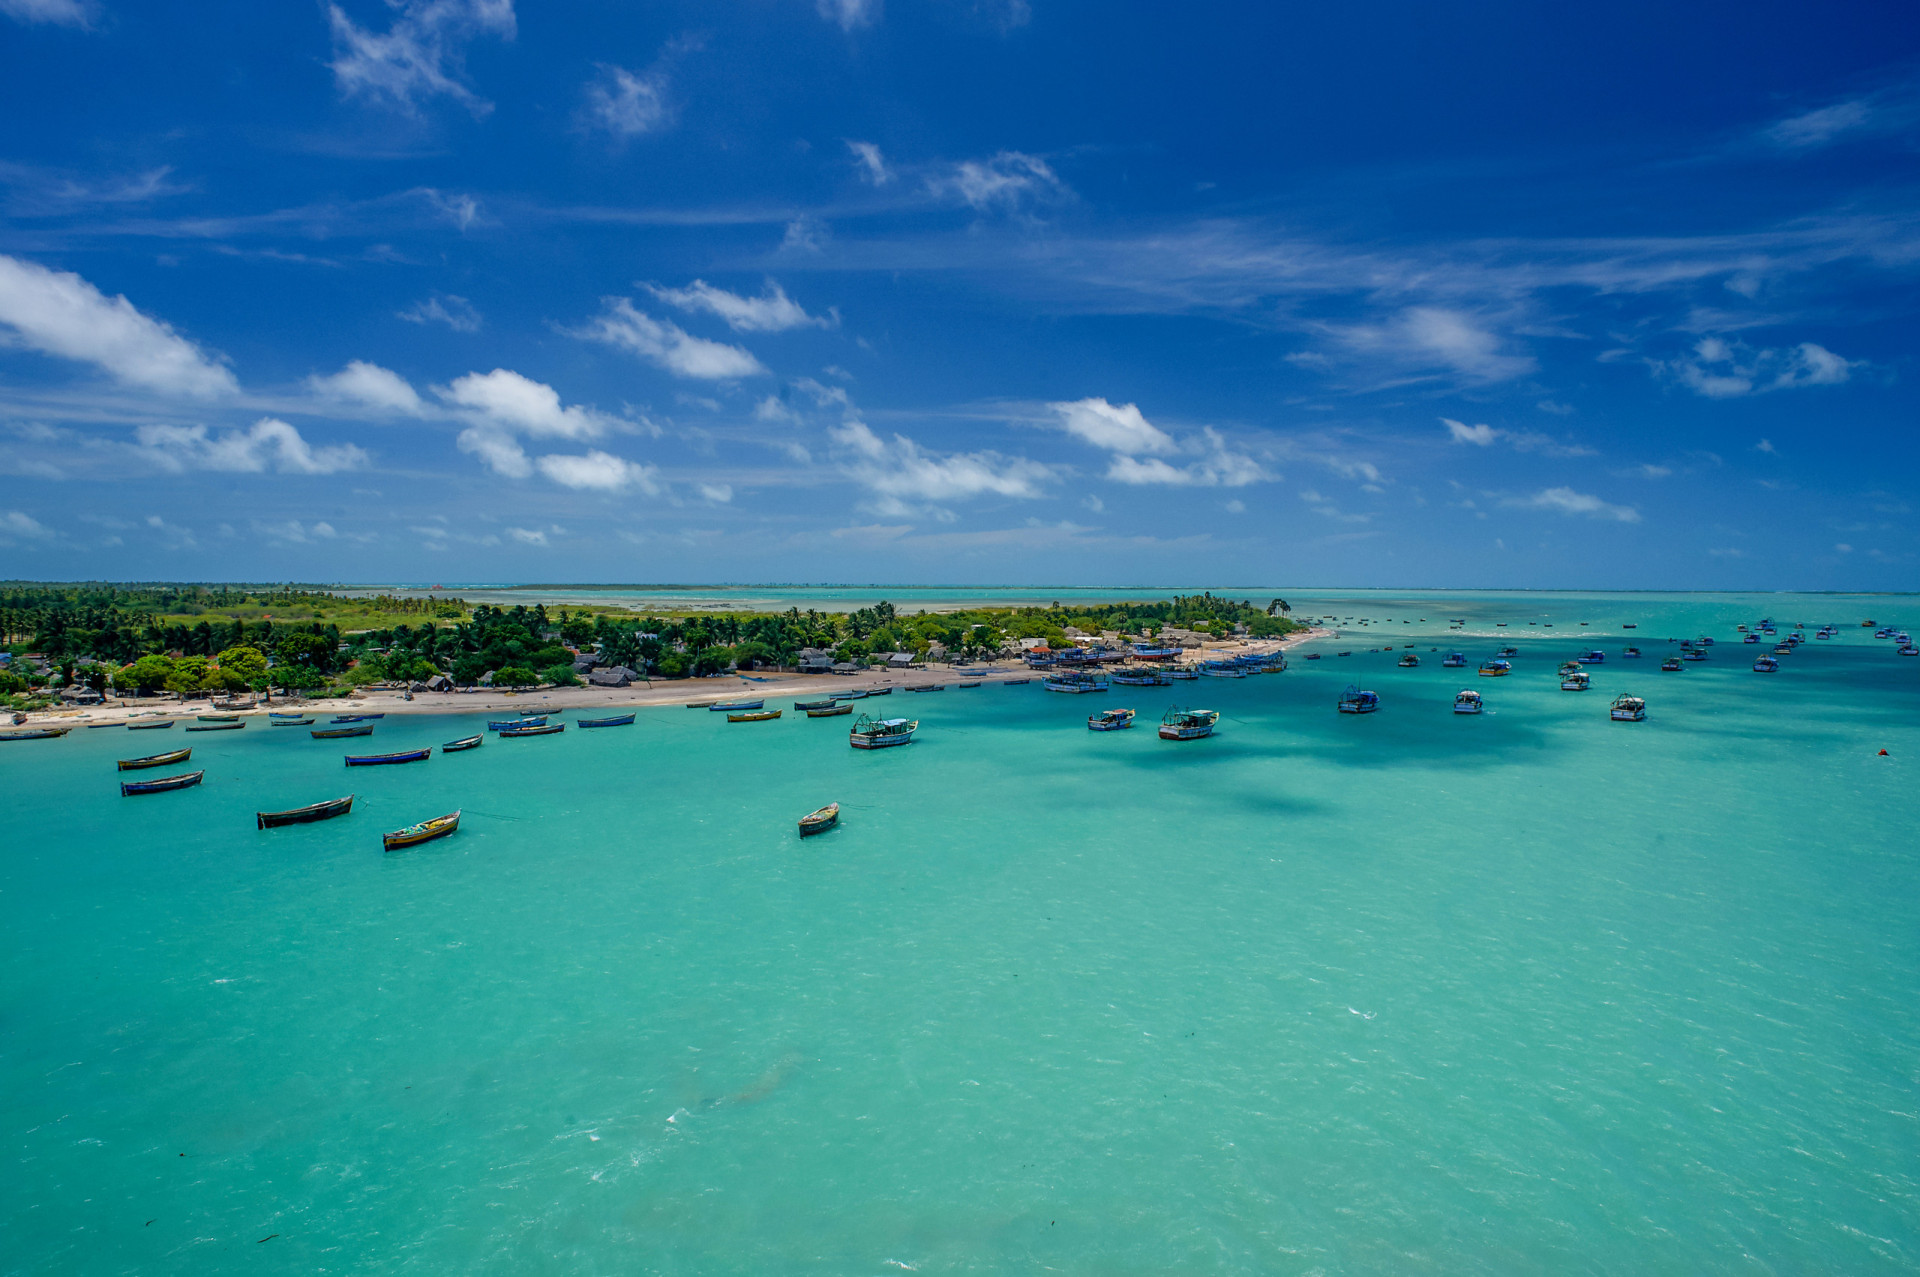 <p>Rameswaram Island, also known as Pamban Island, was originally connected to the mainland by India's first sea bridge, opened in 1914. A new road bridge is set to replace the rail connection to this iconic island, favored for its wealth of beaches and temples.</p><p><a href="https://www.msn.com/en-my/community/channel/vid-7xx8mnucu55yw63we9va2gwr7uihbxwc68fxqp25x6tg4ftibpra?cvid=94631541bc0f4f89bfd59158d696ad7e">Follow us and access great exclusive content every day</a></p>